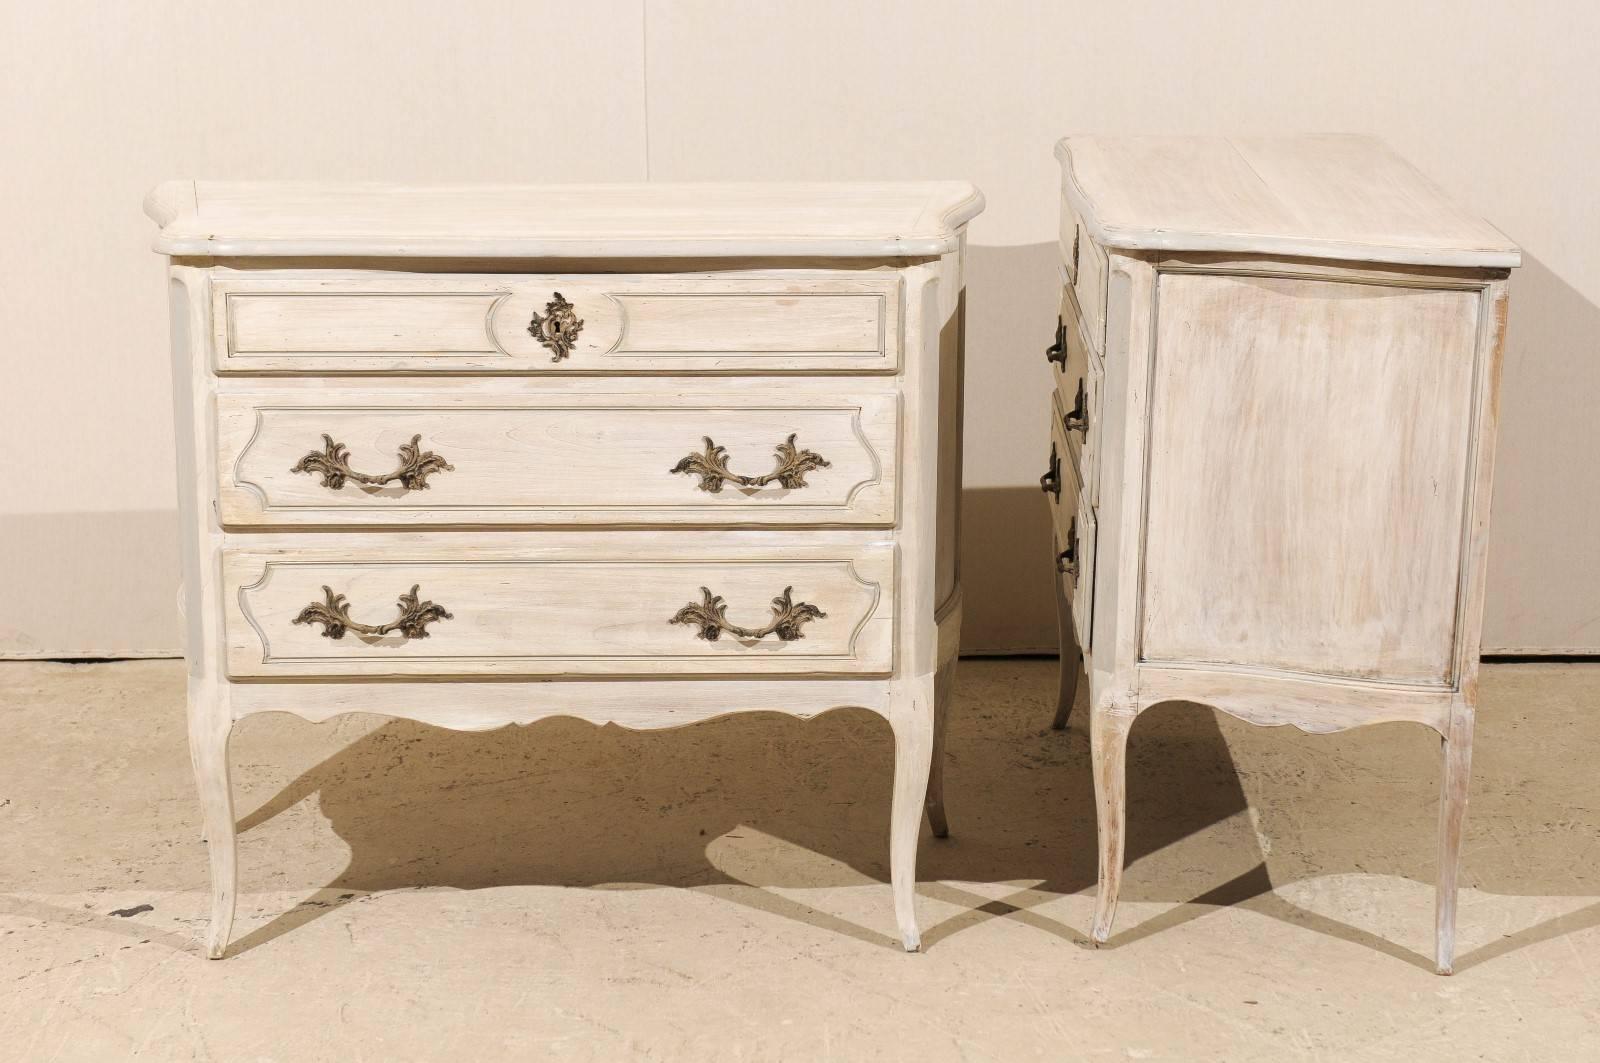 Carved Pair of Vintage Three-Drawer Raised Chests, American with Rococo Style Hardware